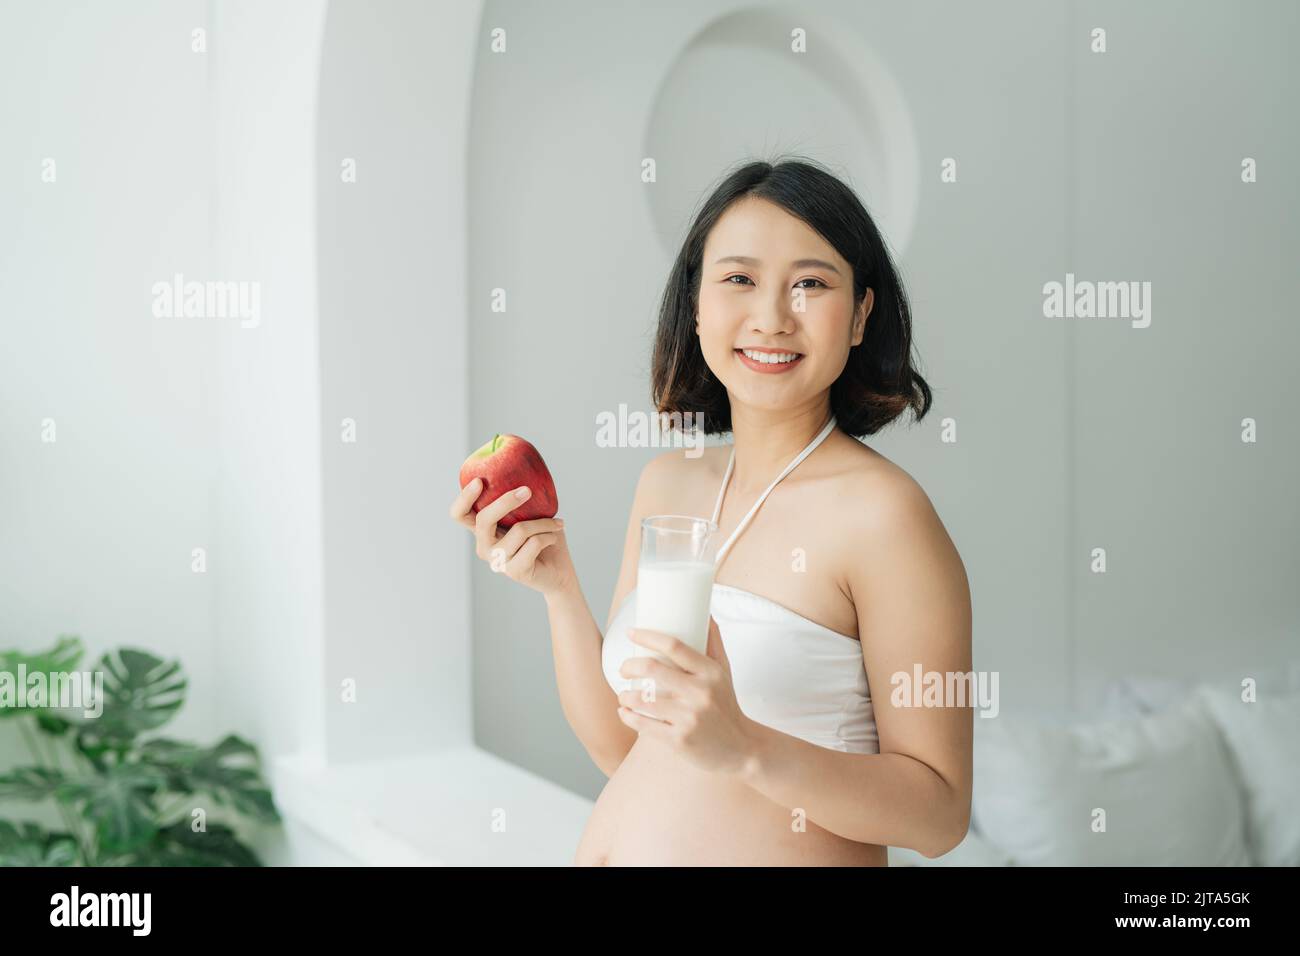 Pregnant Asia woman holding a glass of milk and red apple at home Stock Photo